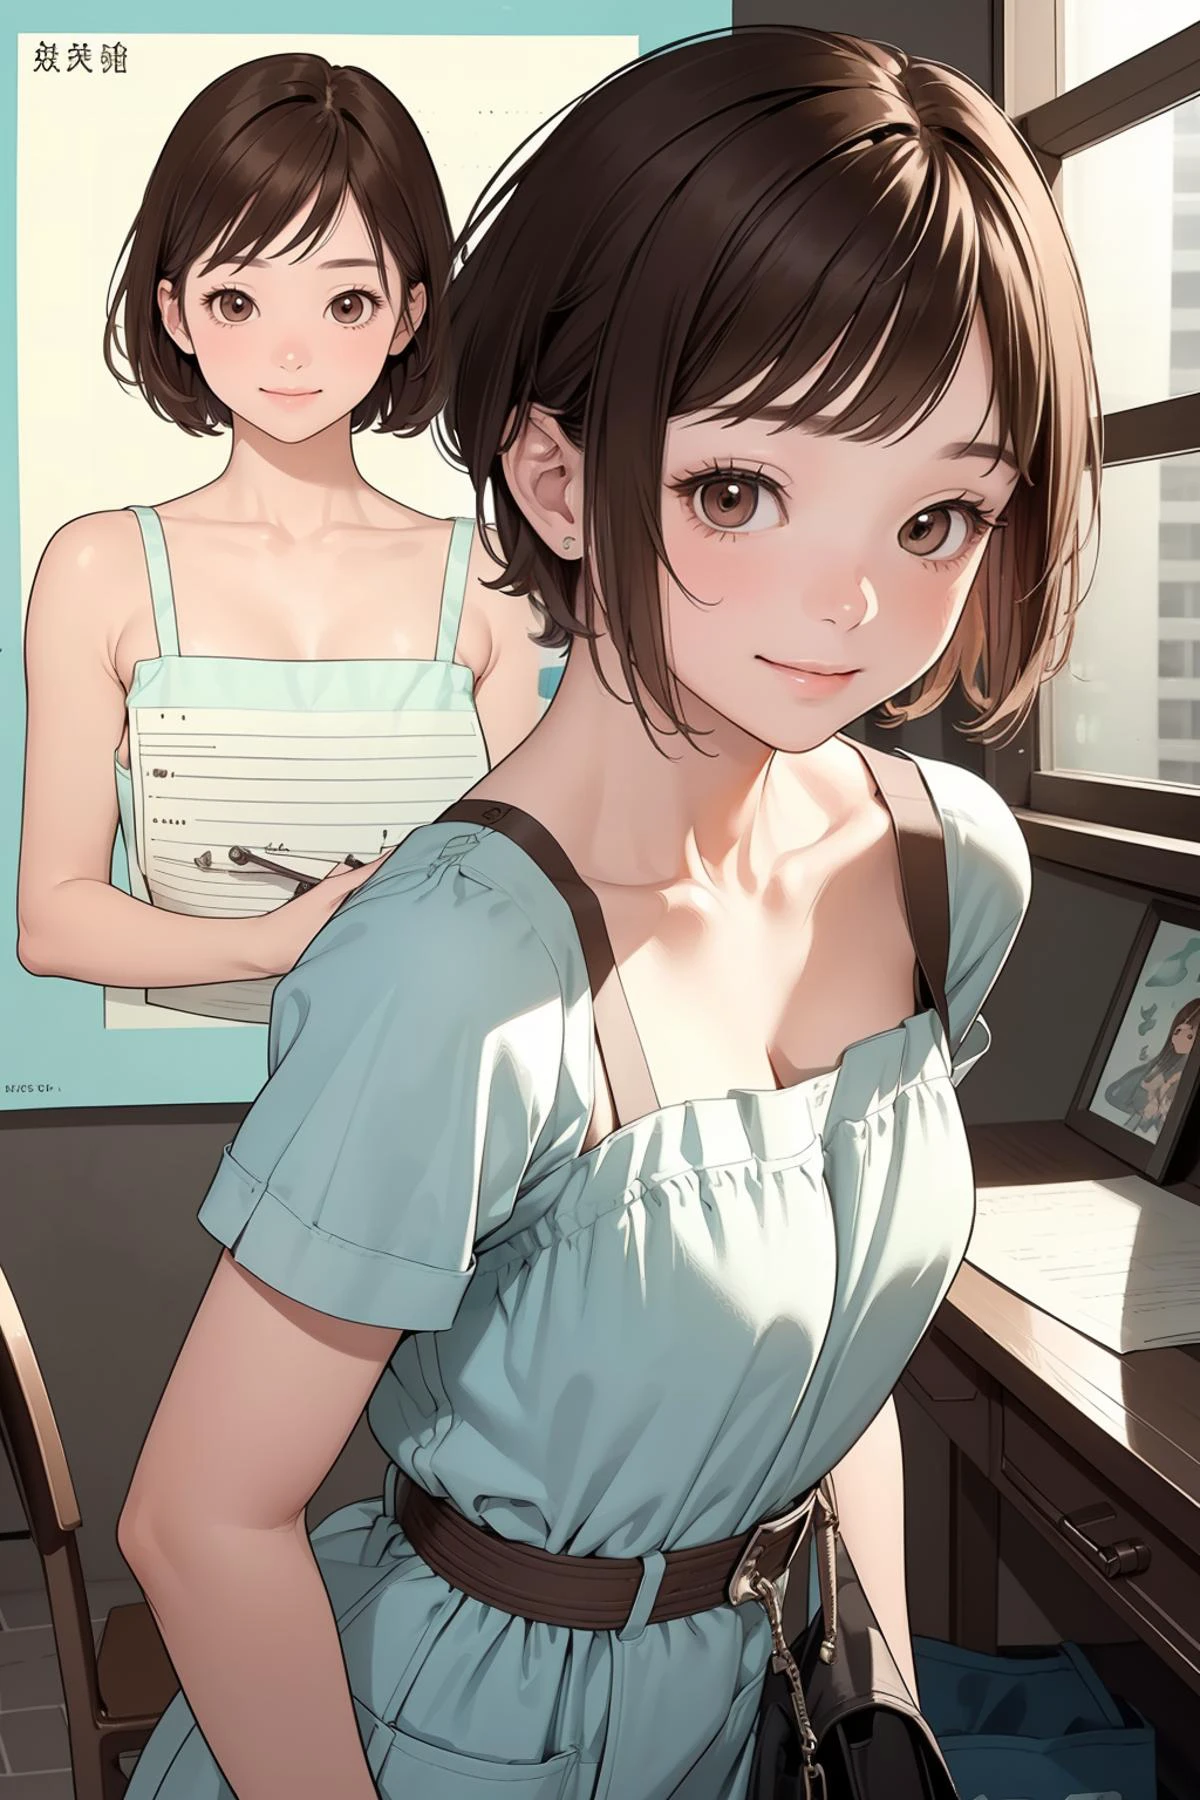 8k high quality detailed,highres,comic,anime,detailed image,
(an illustration of a teenage girl posing,magazine_sheet, (an illustration of girl,teenage girl)),(magazine_illustration),(multiple view manuscript),
(, MakiCounterStrike,1girl,short hair,brown hair,brown eyes),(Welcoming Smile),((onna zuwari):0.5),detailed_face,realistic_skin_texture,
(, edgAsianc,wearing edgAsianc),realistic clothing texture,